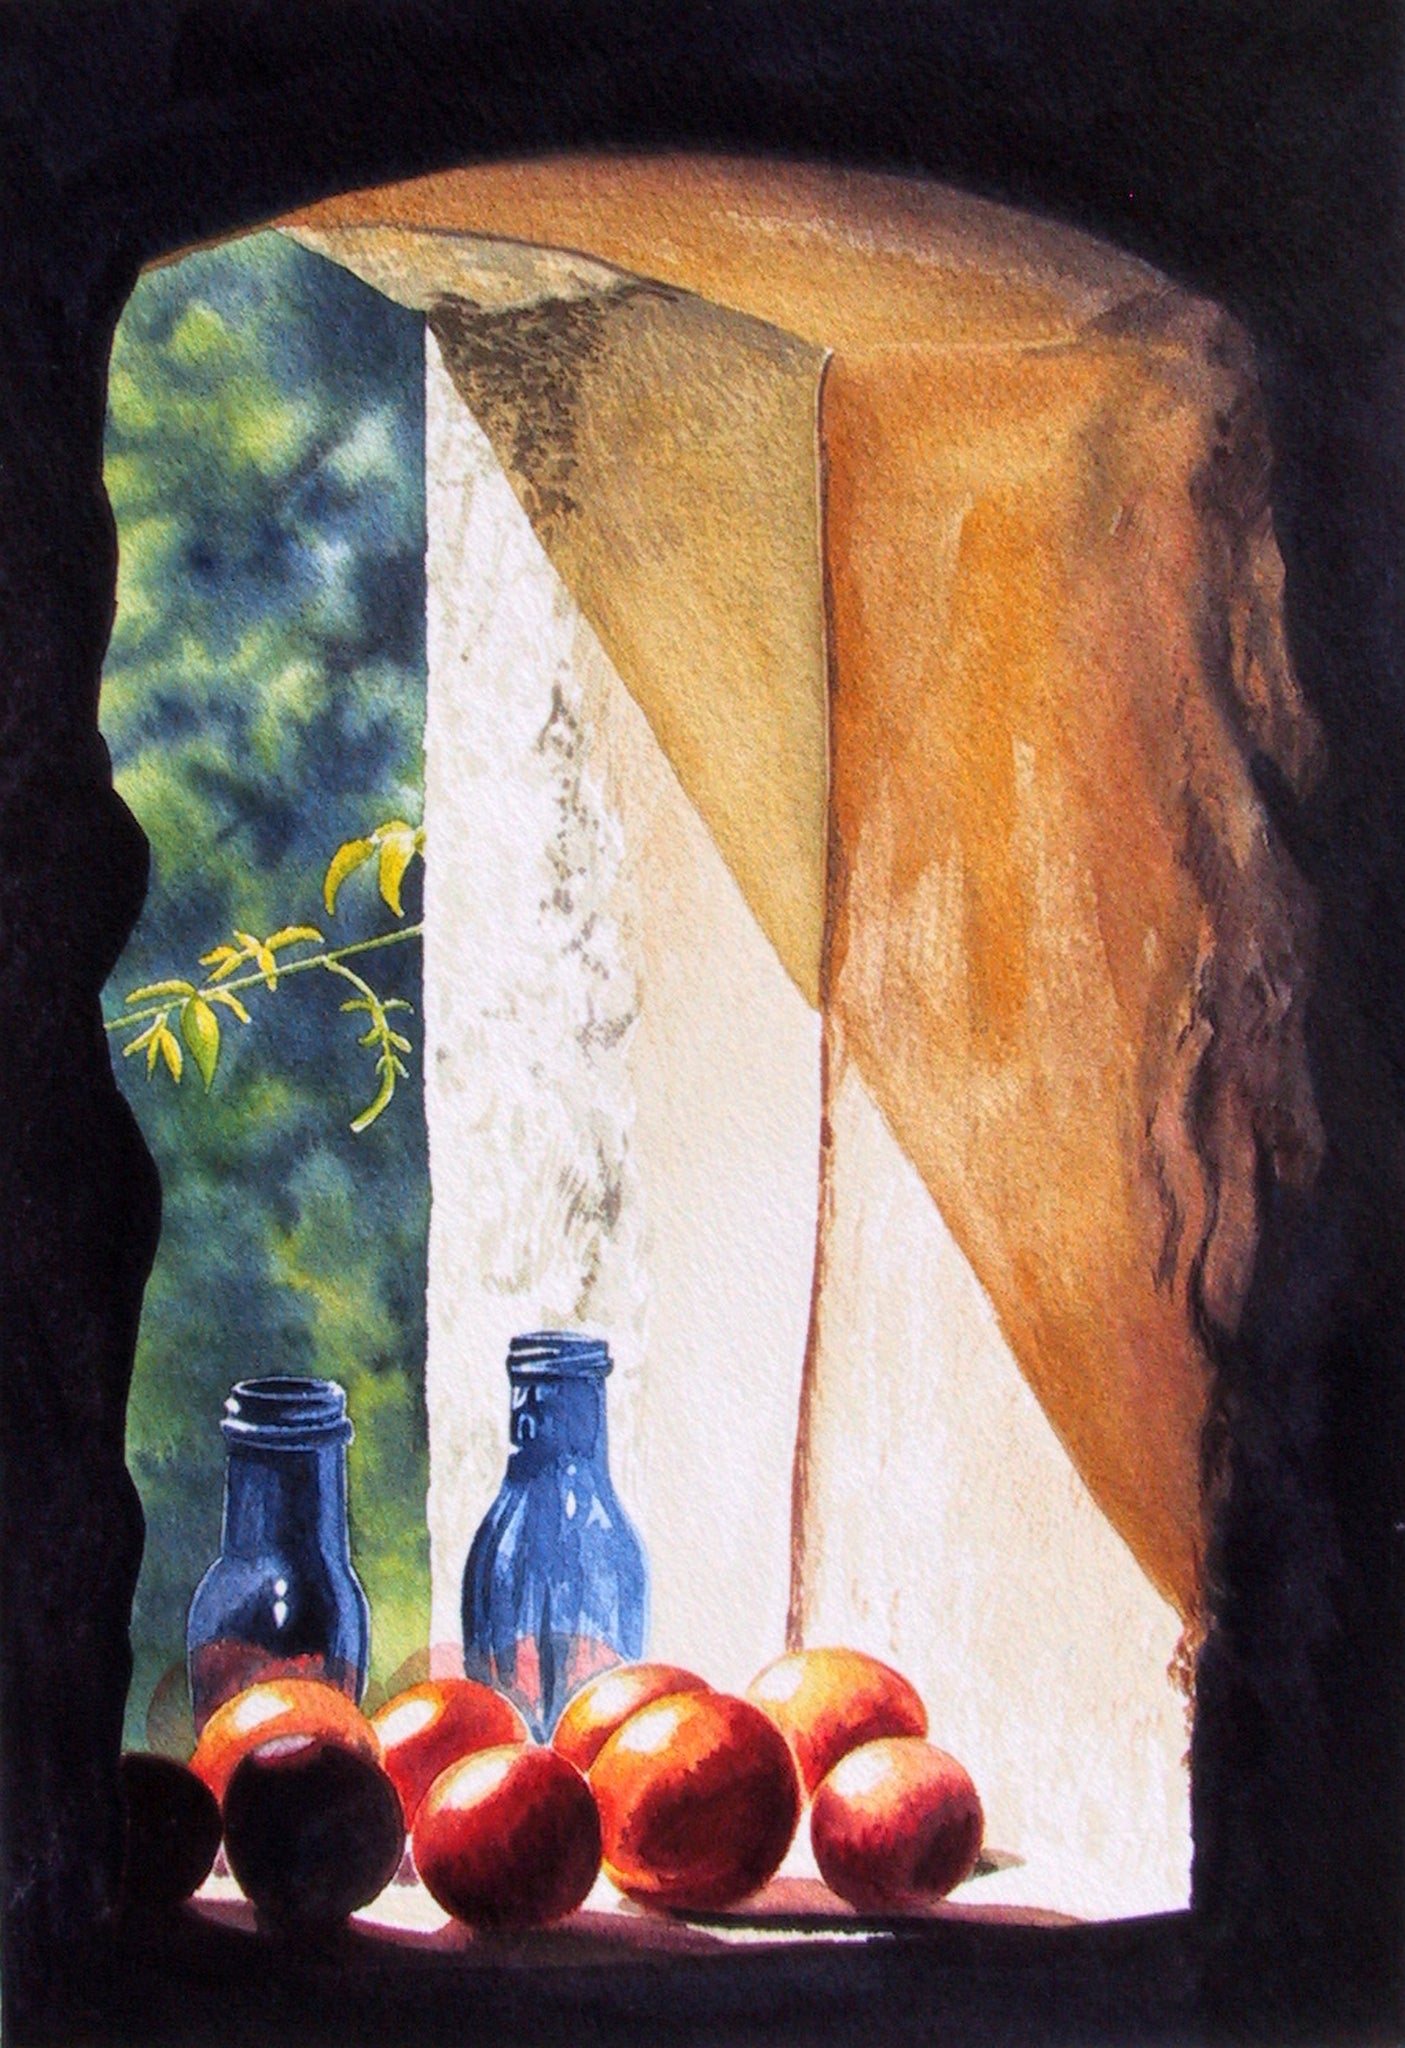 TOMATOES IN THE SUN - ORIGINAL PAINTING